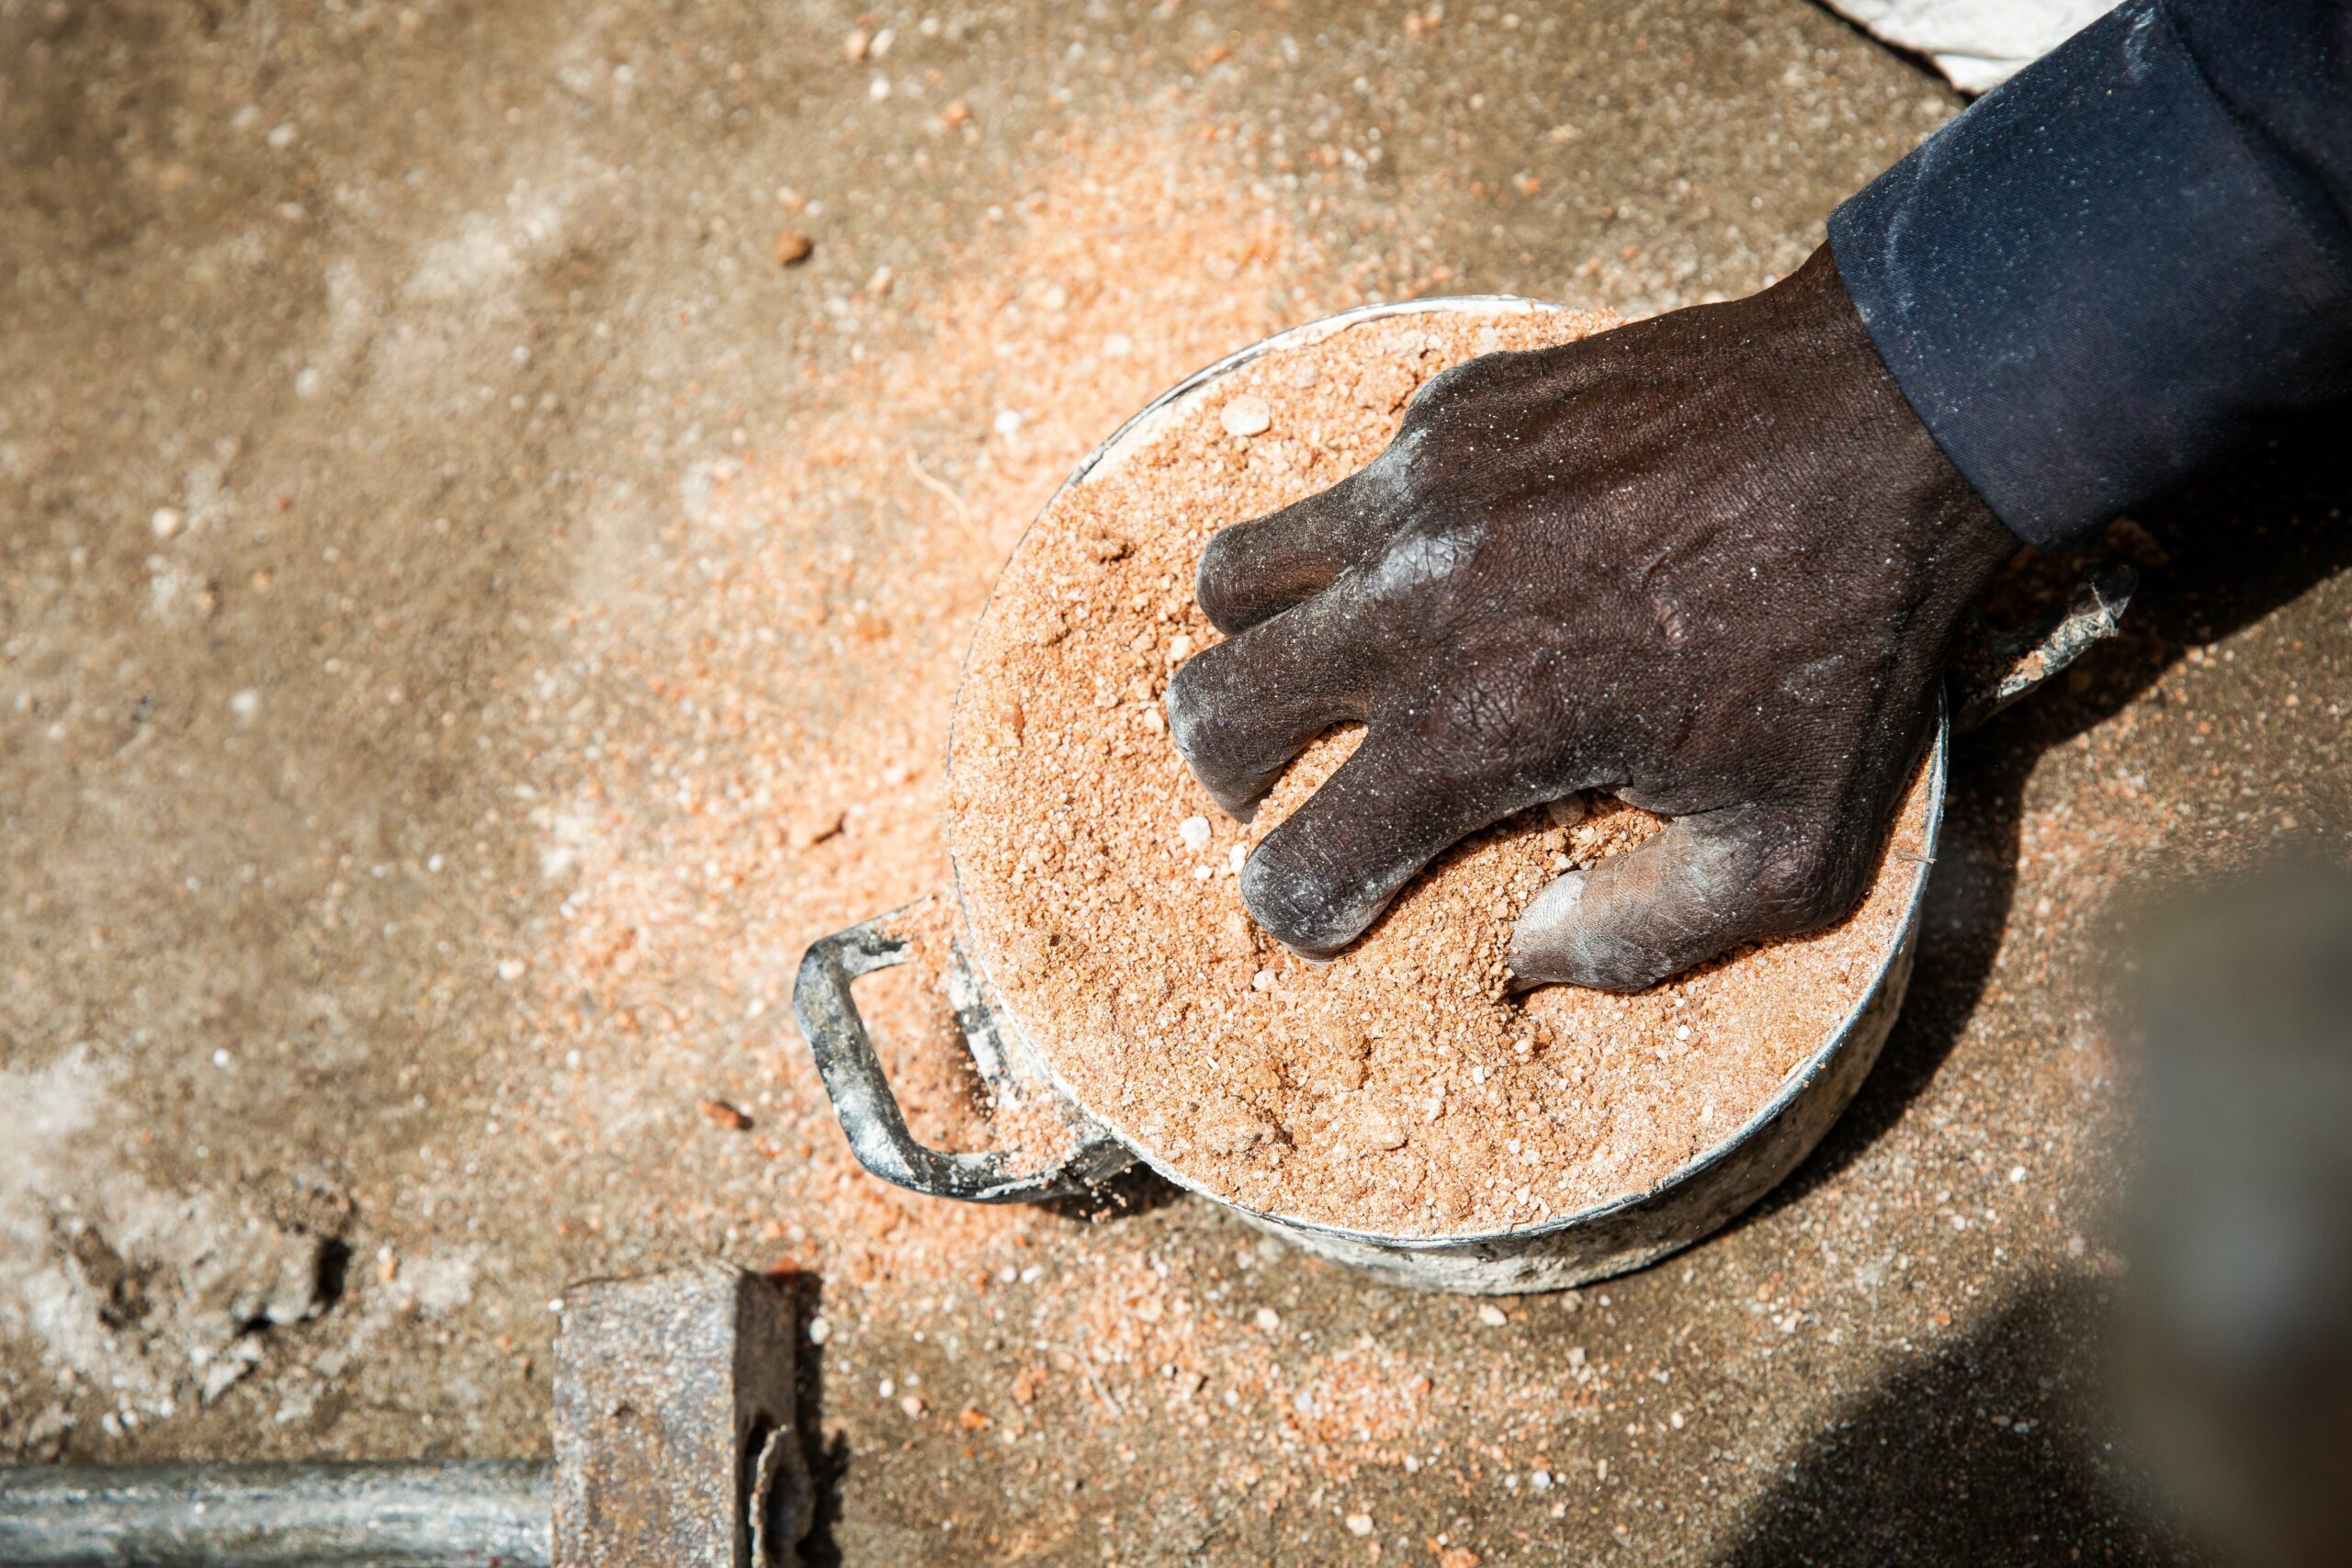 A hand digs into a pot of bronze casting pieces.